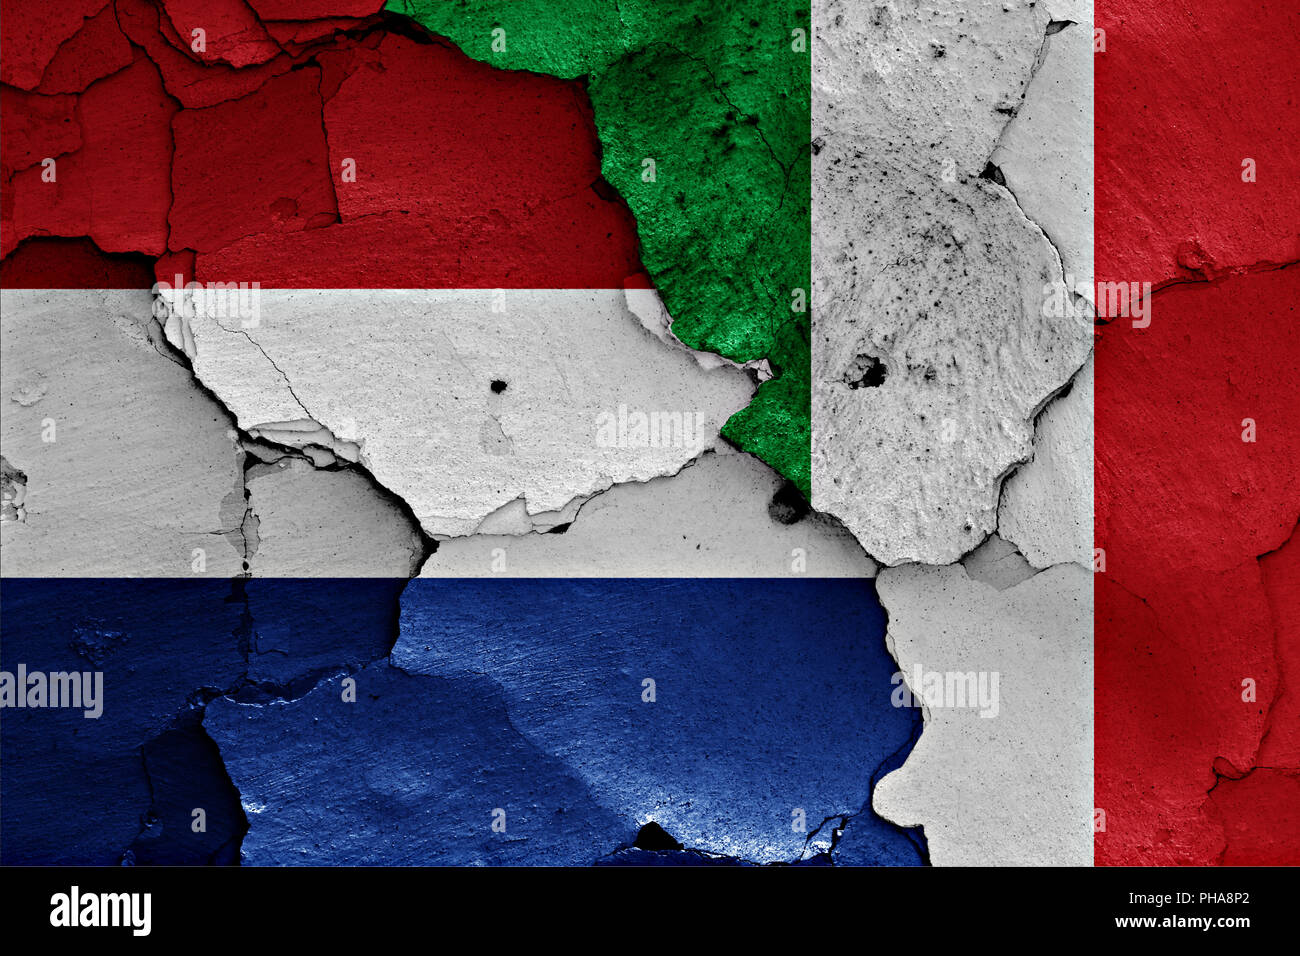 Flags of Netherlands and Italy  painted on cracked wall Stock Photo